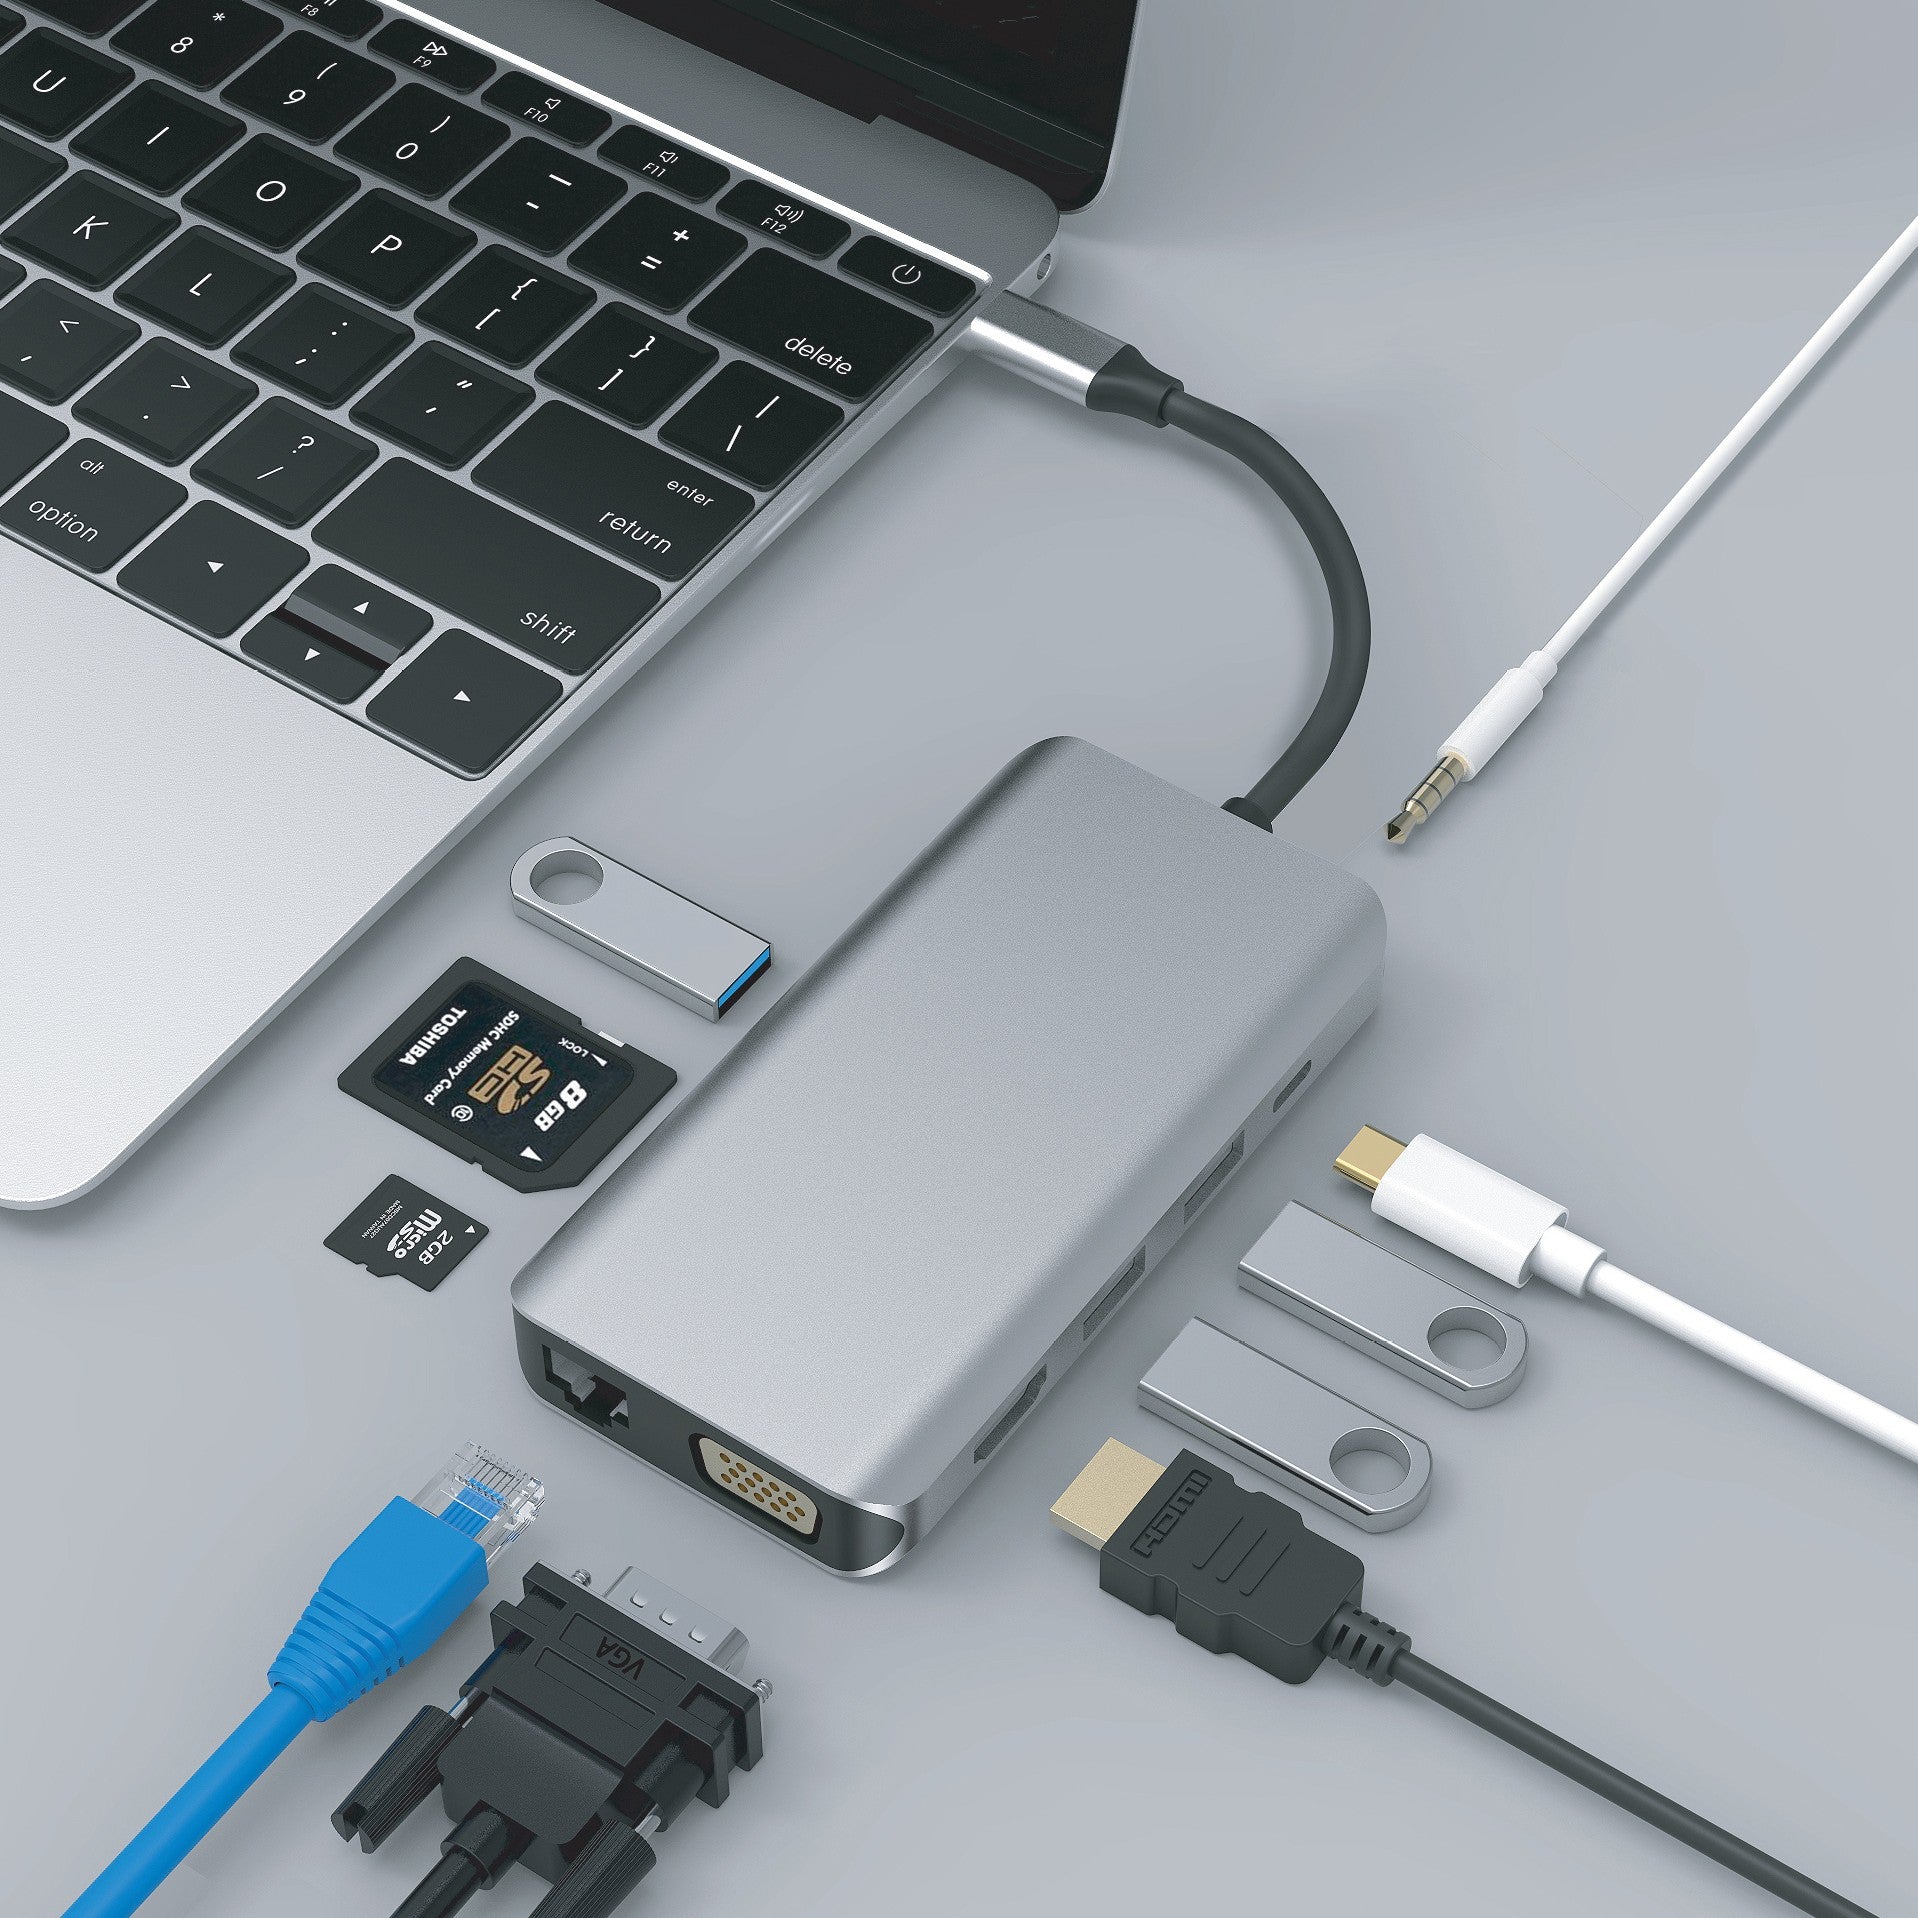 USB-C Multiport Adapter, USB-A, SD Card Reader, PD Charging